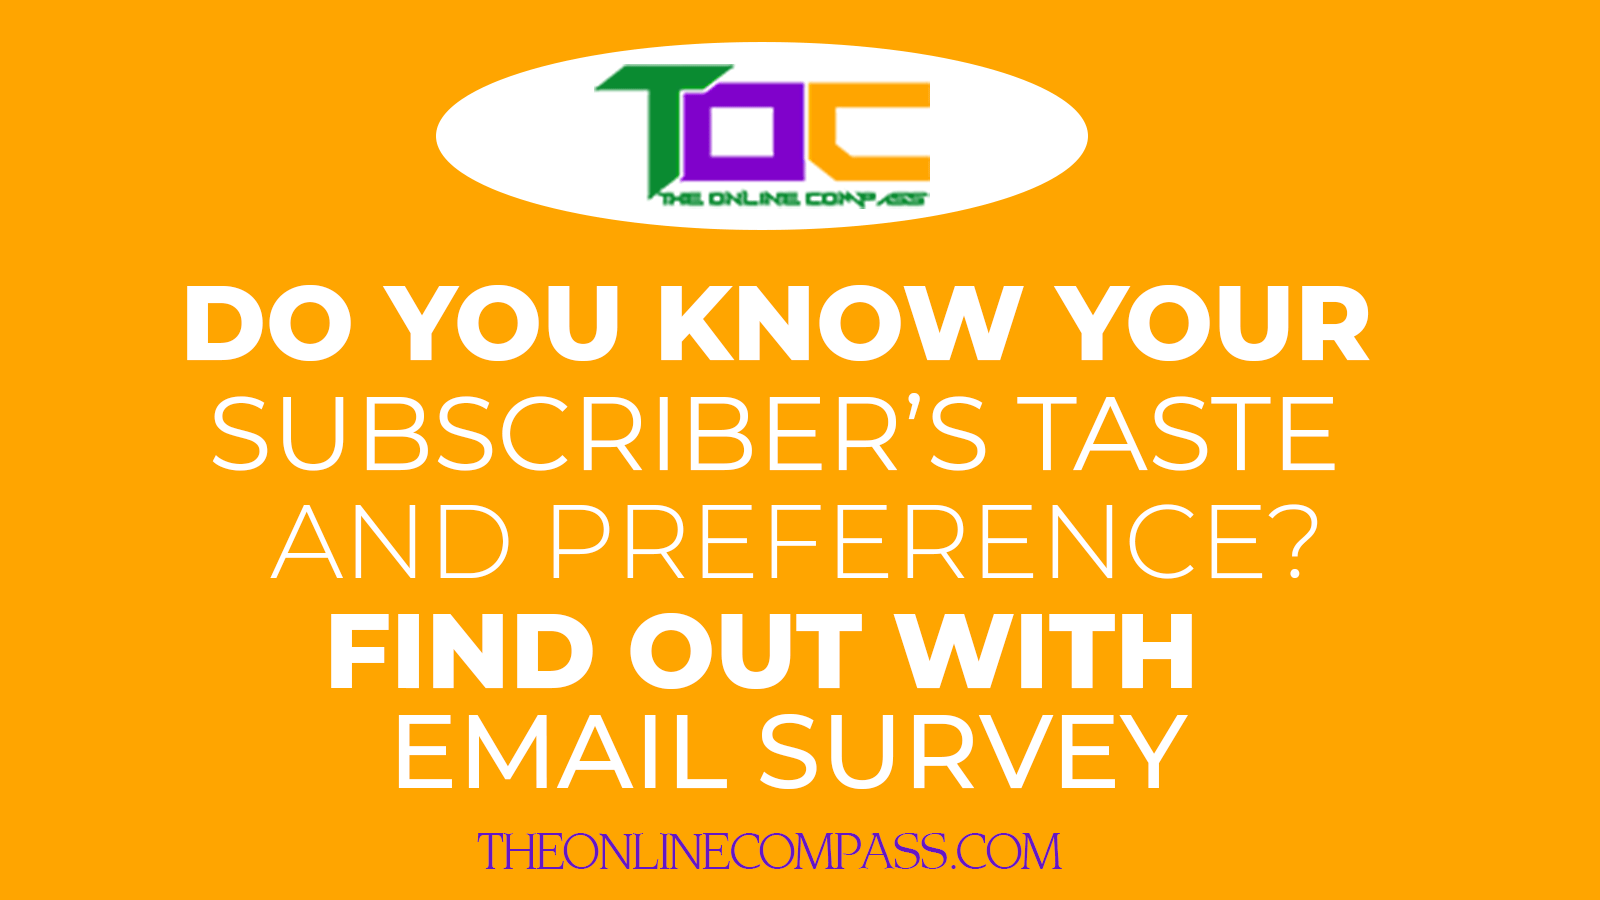 Learn how to build a lasting relationship with your customers by using email survey